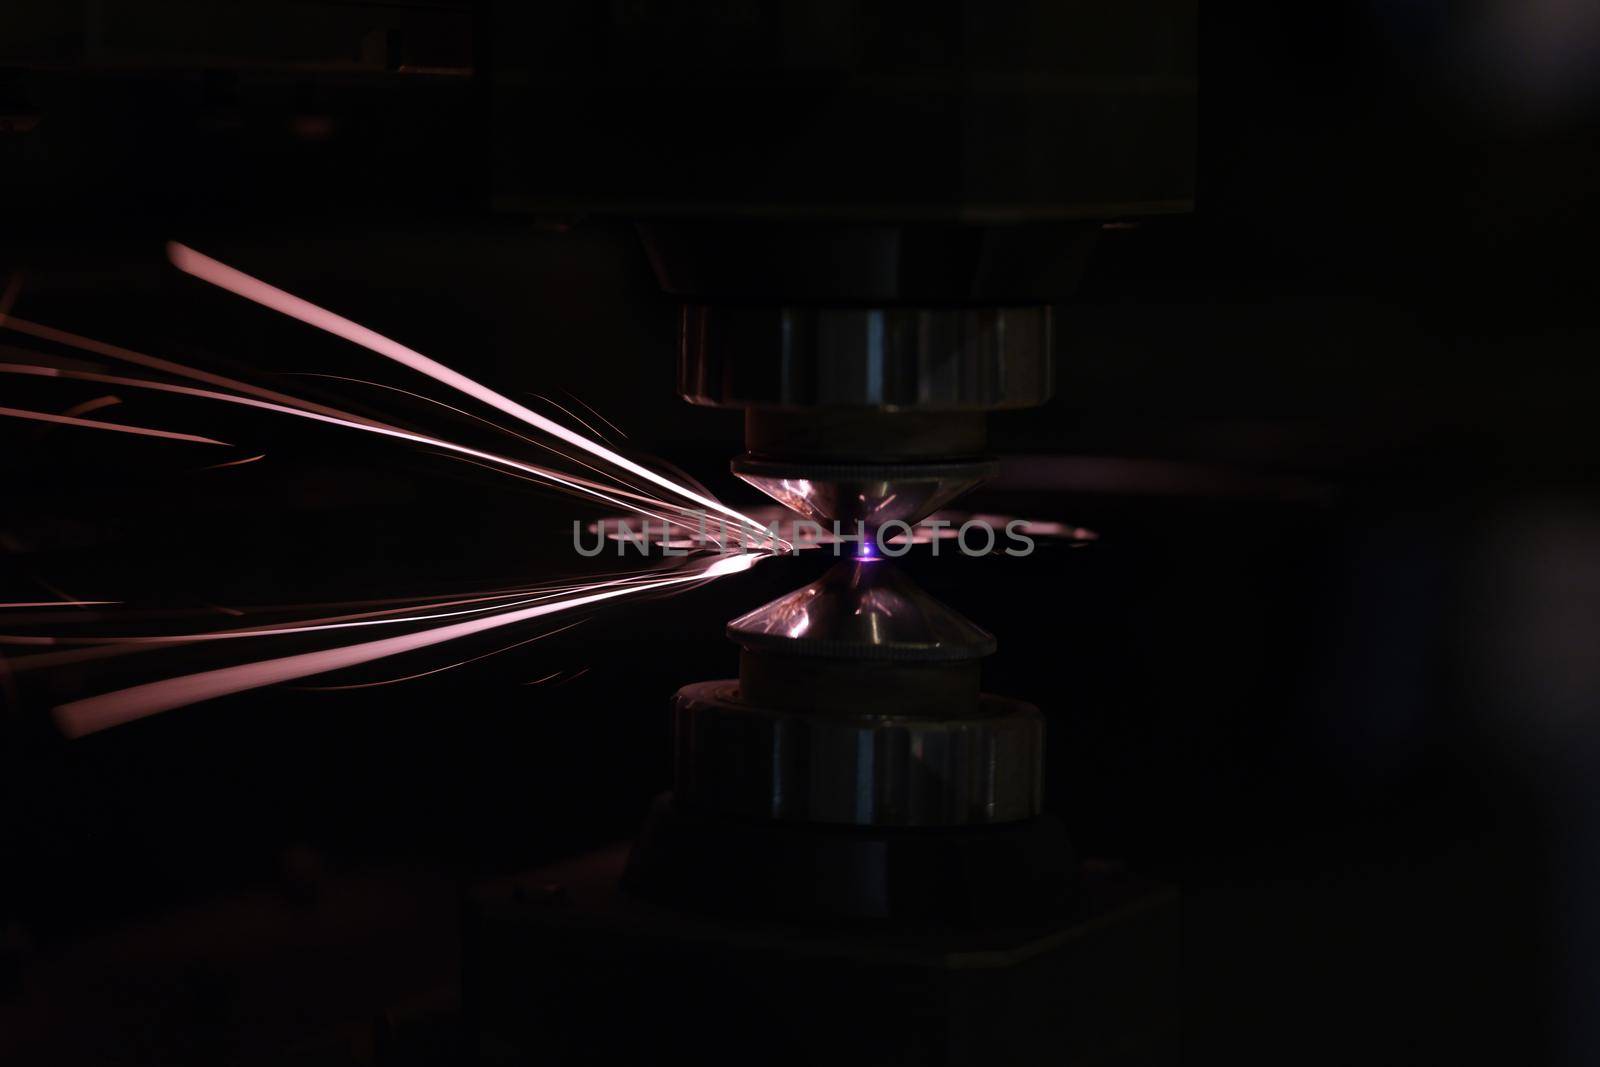 Process of cutting metal using plasma cutting in dark. Industry and metal processing concept